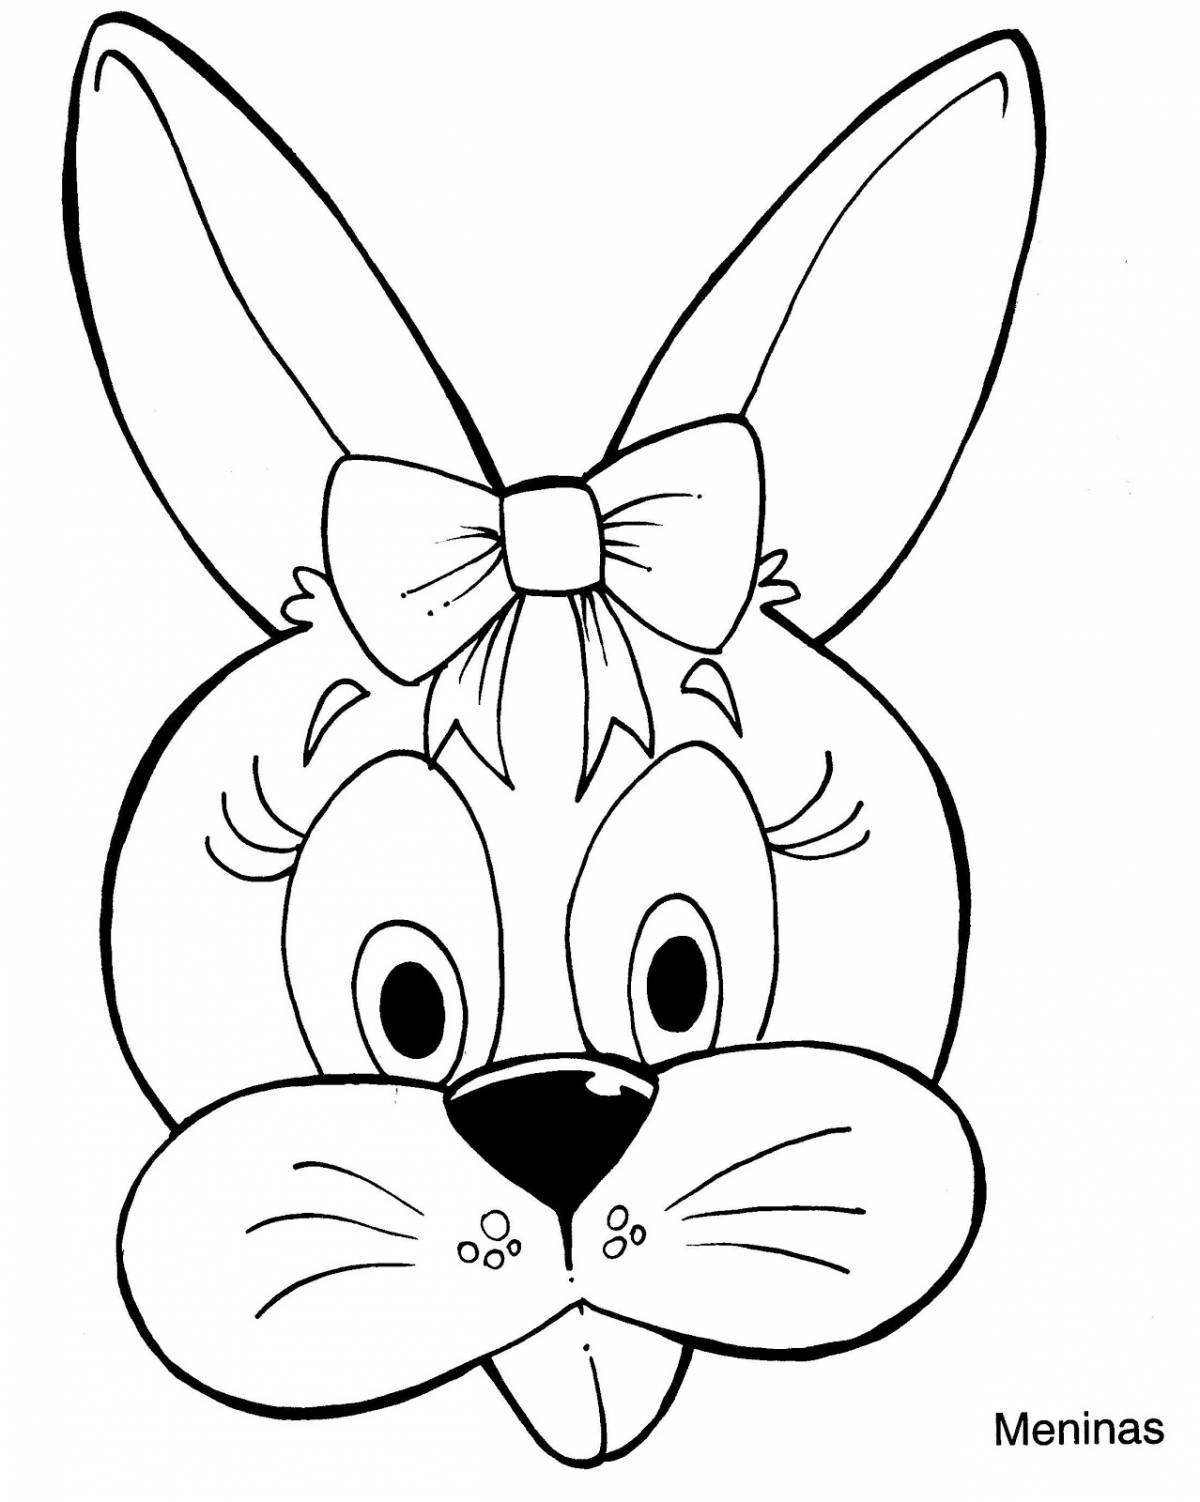 Crazy bunny mask coloring page